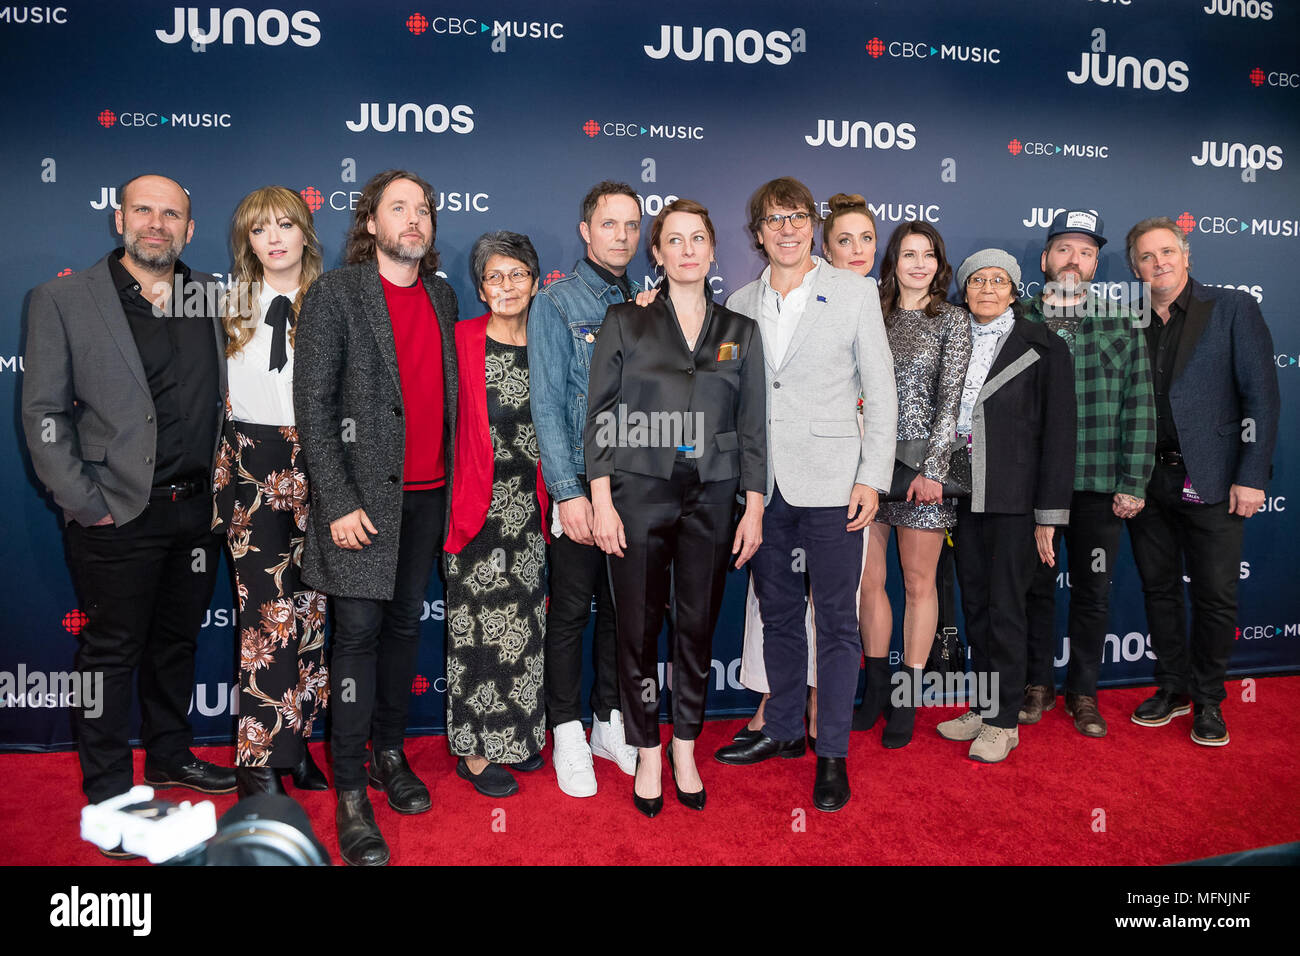 2018 JUNO Awards, held at the Rogers Arena in Vancouver, Canada.  Featuring: Kevin Drew, Sarah Harmer, Dallas Green Where: Vancouver, British Columbia, Canada When: 25 Mar 2018 Credit: Lu Chau/WENN.com Stock Photo